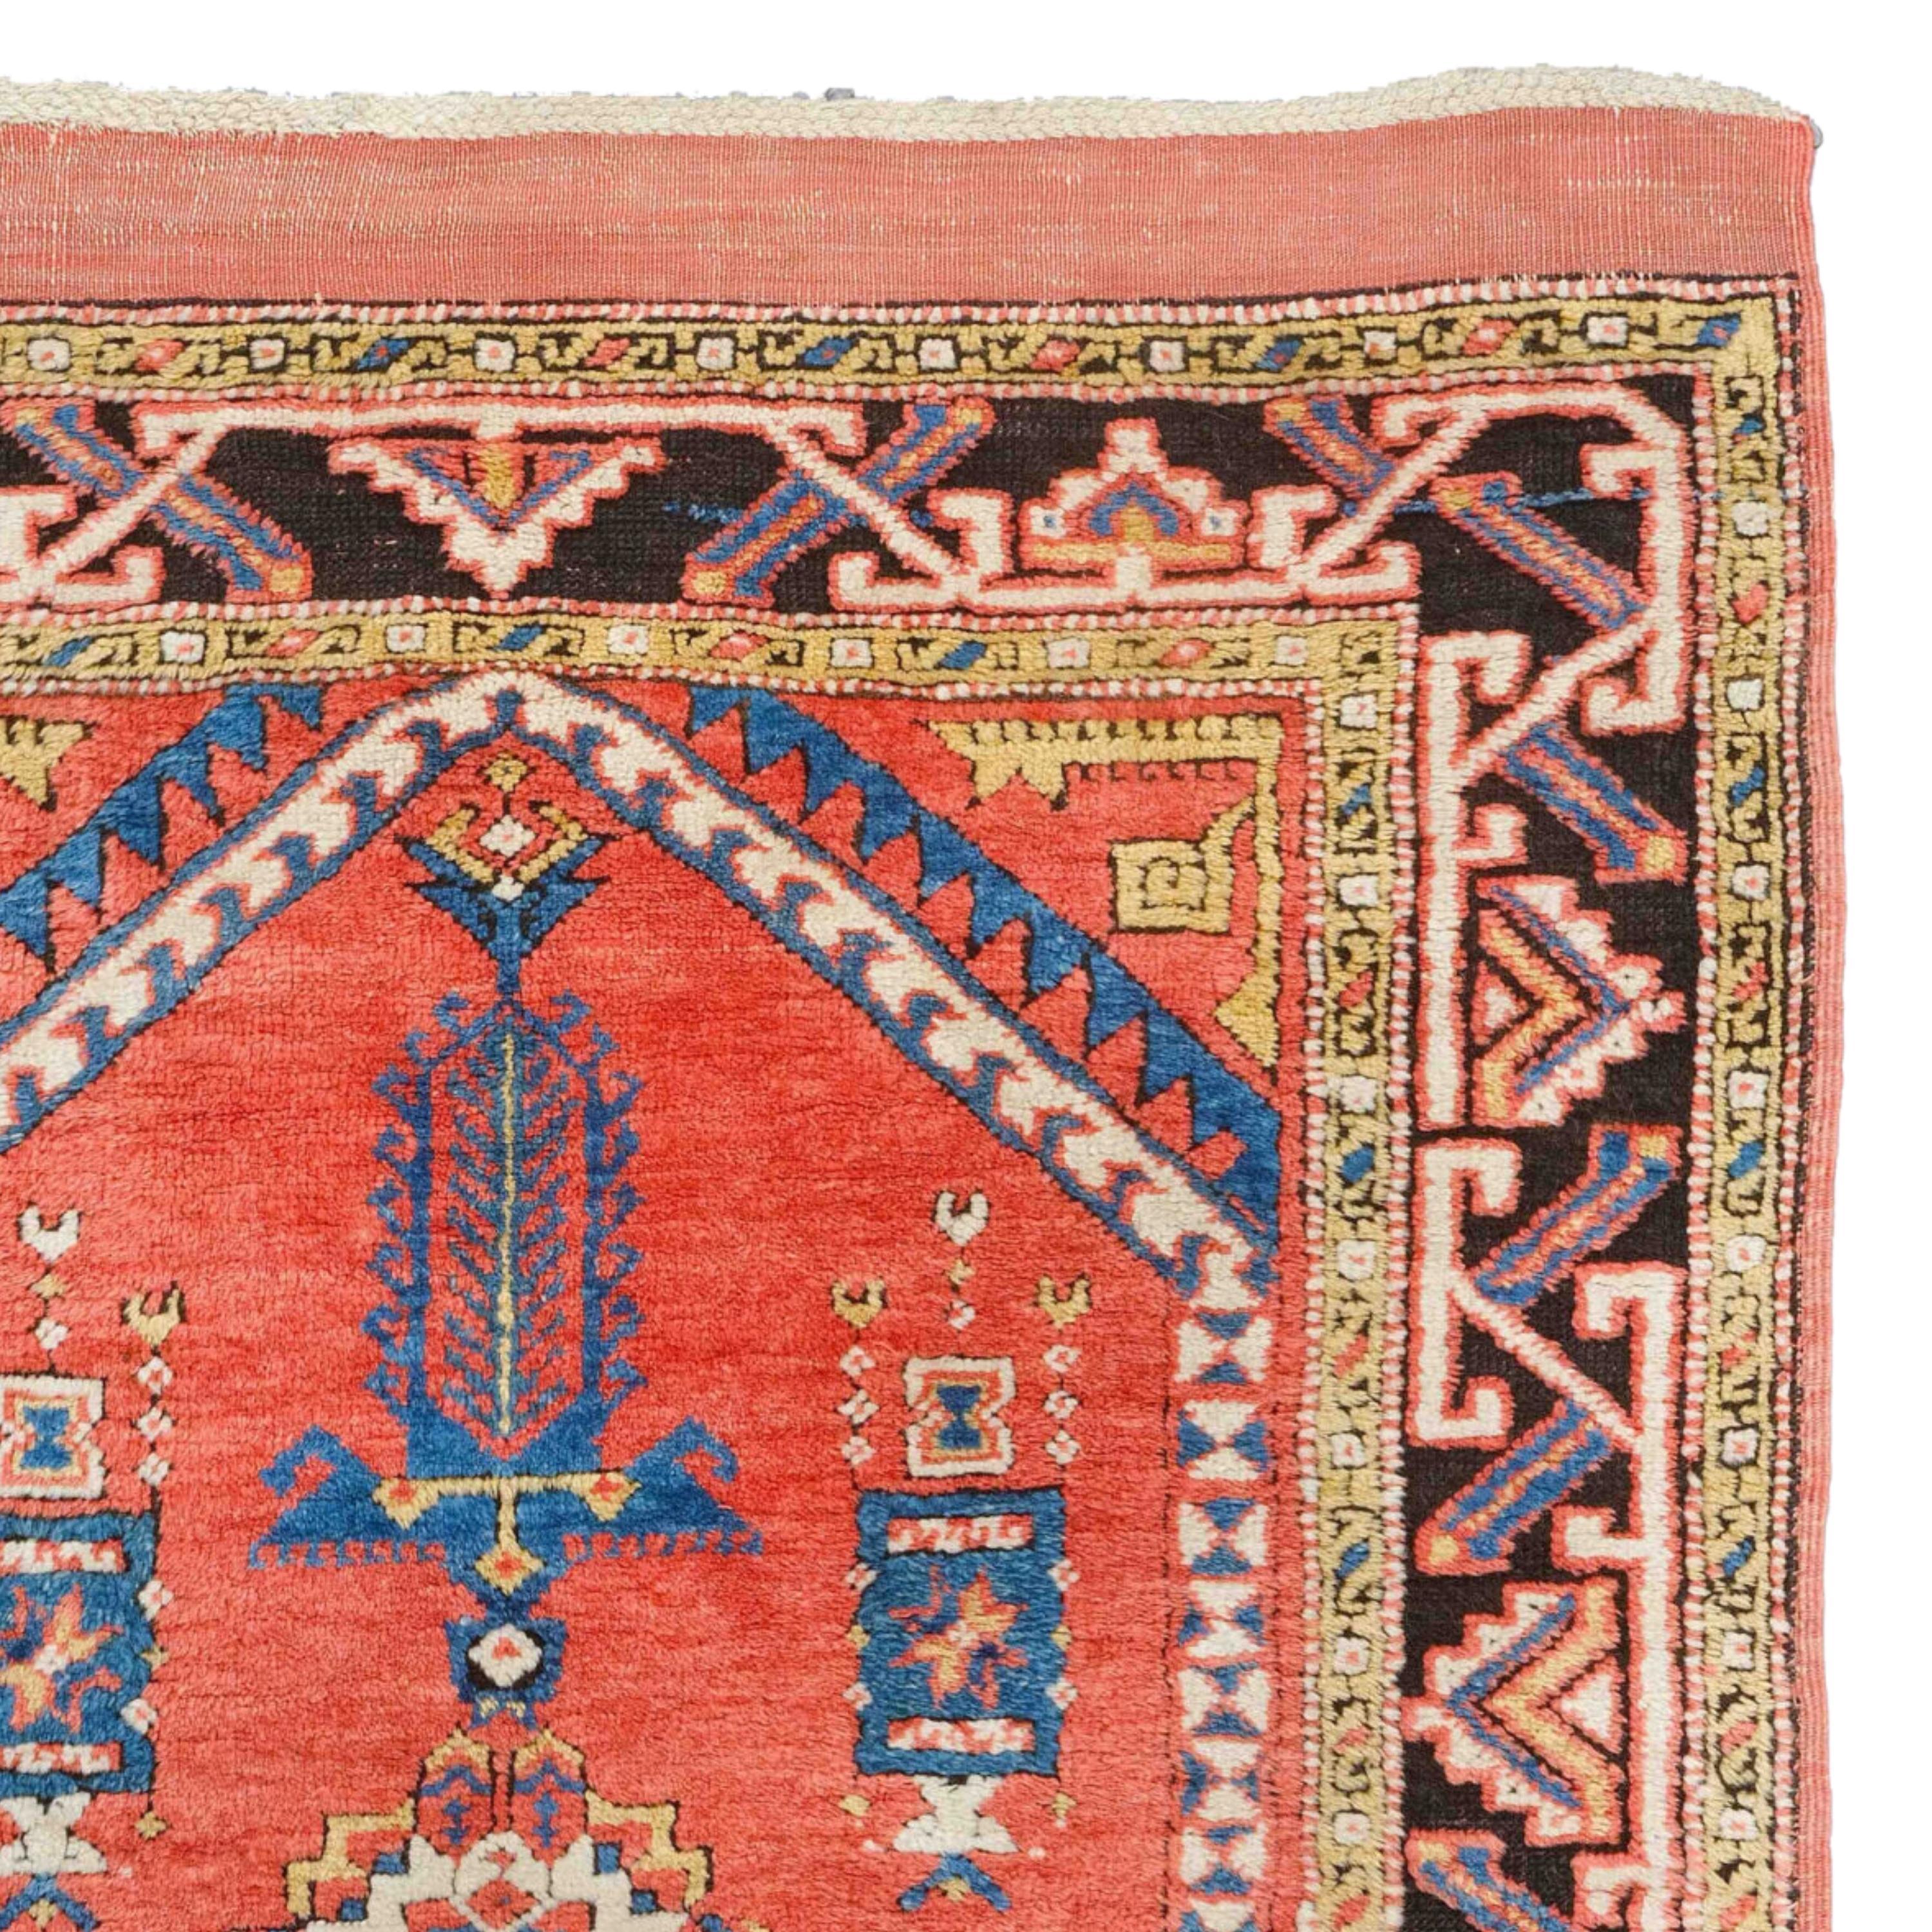 Antique Bergama Rug - Early 19th Century Anatolian Prayer Bergama Rug In Good Condition For Sale In Sultanahmet, 34